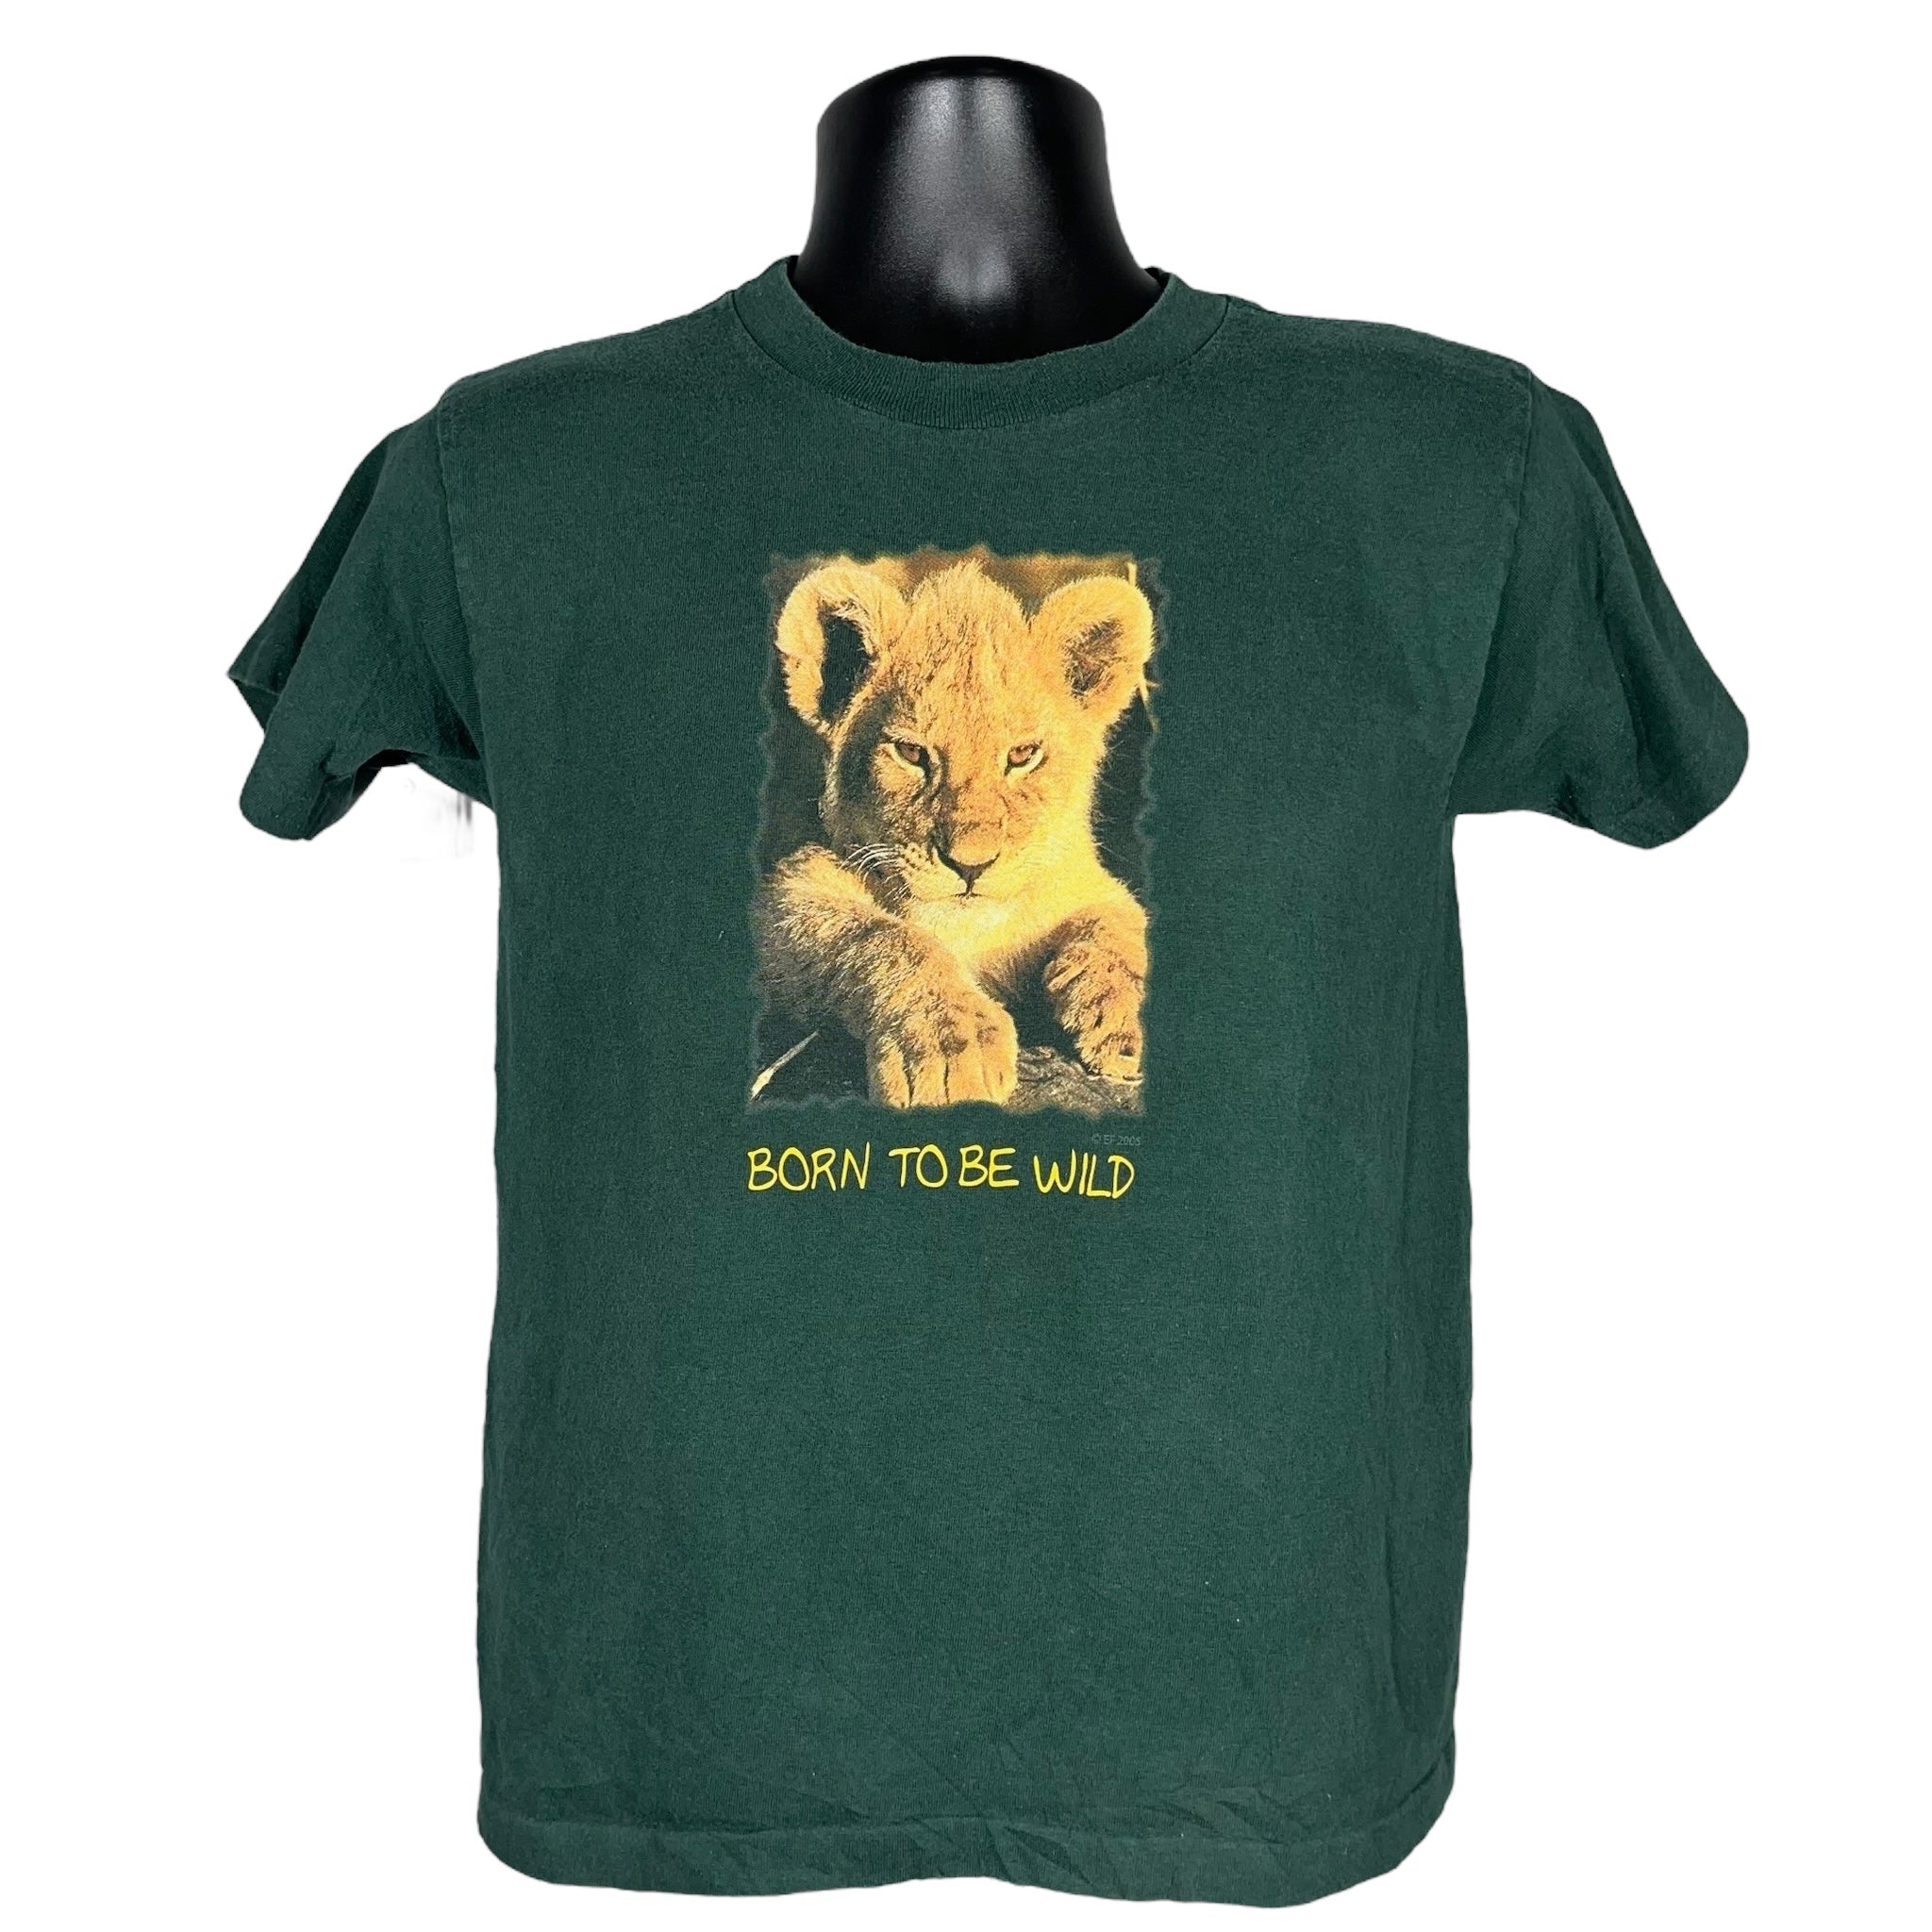 Vintage Lion Cub "Born To Be Wild" Youth Tee 2000s